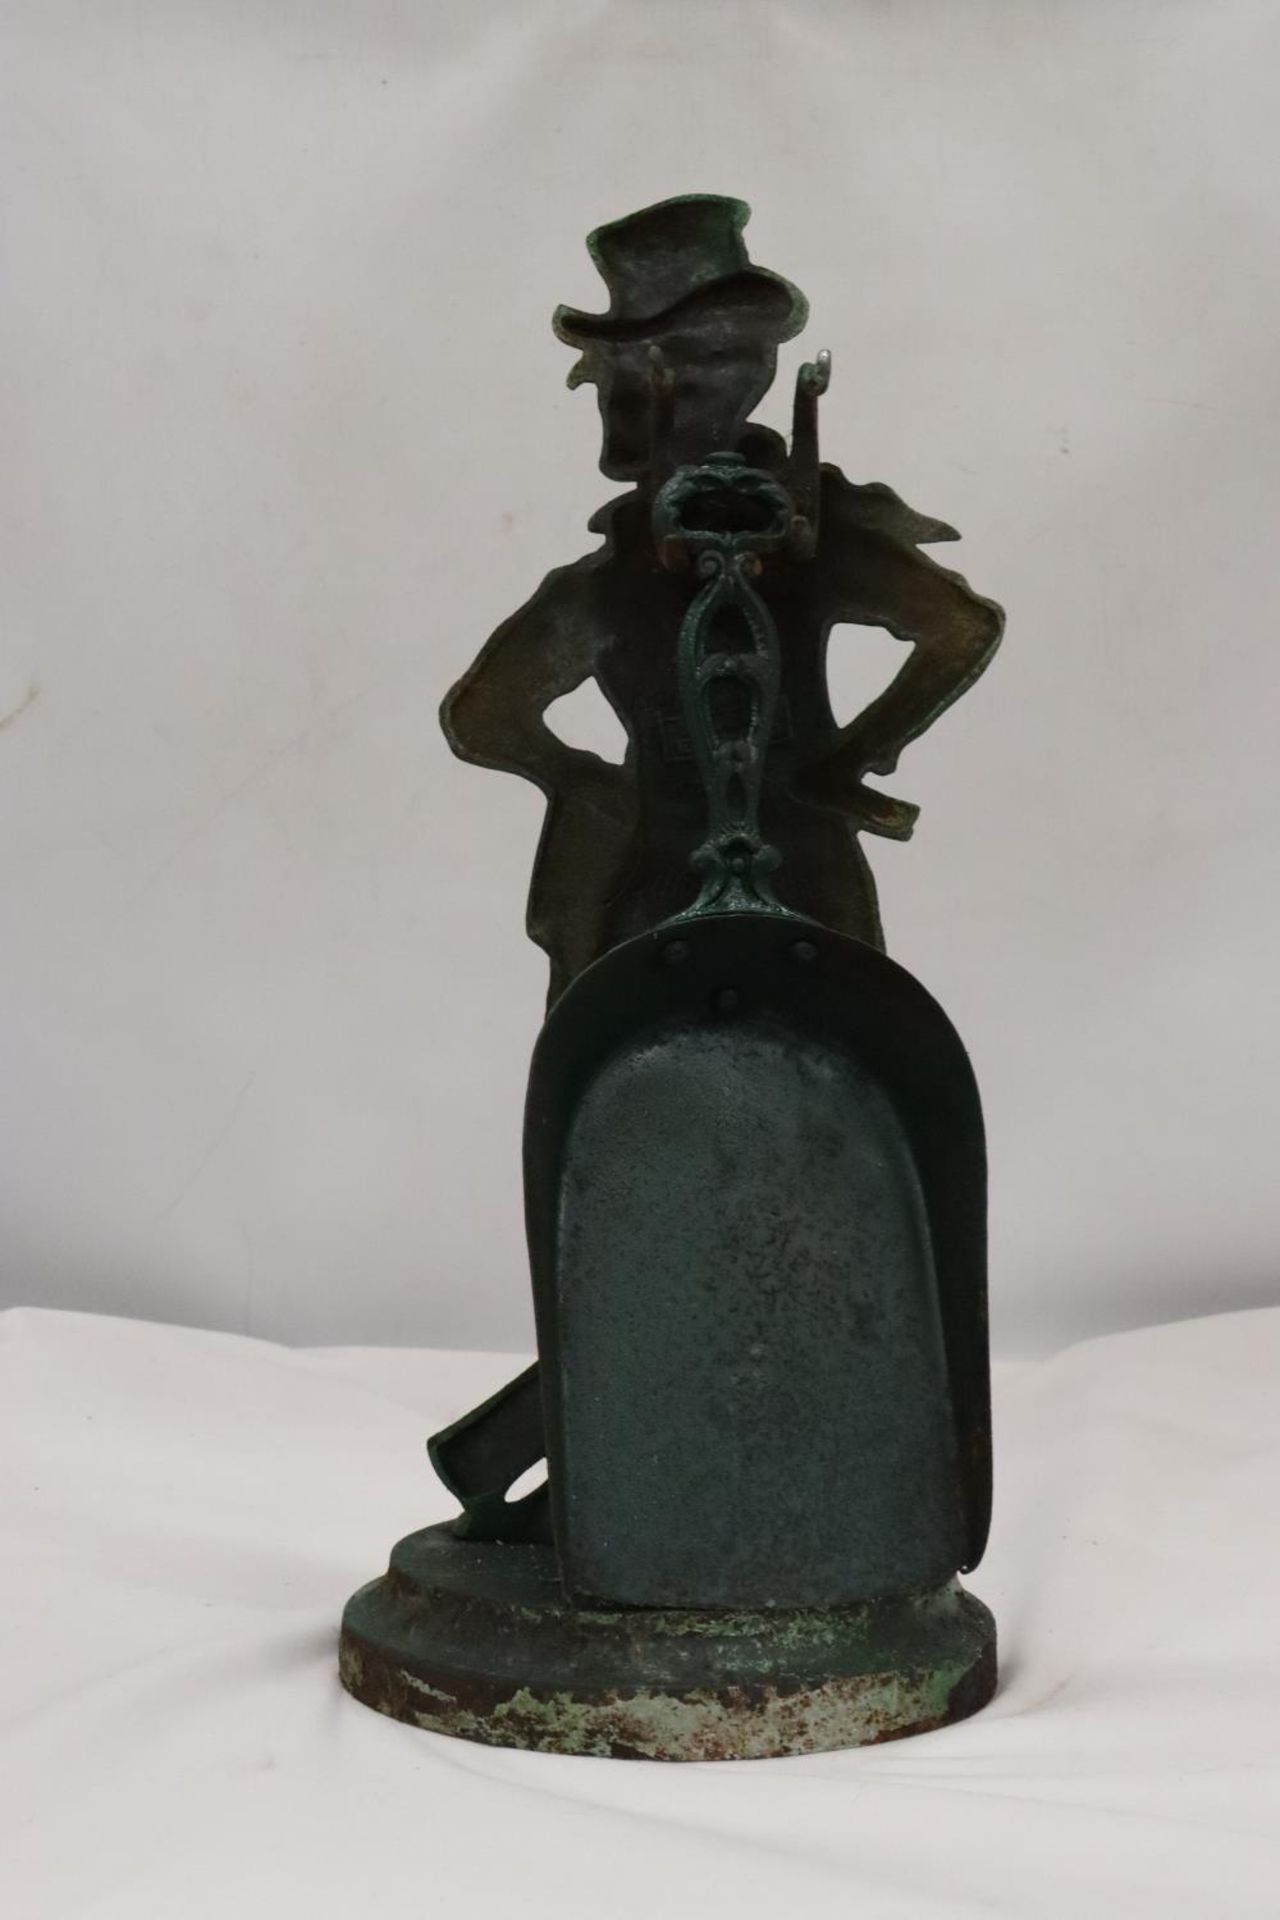 A VINTAGE CAST DOORSTOP WITH A SHOVEL - Image 3 of 4